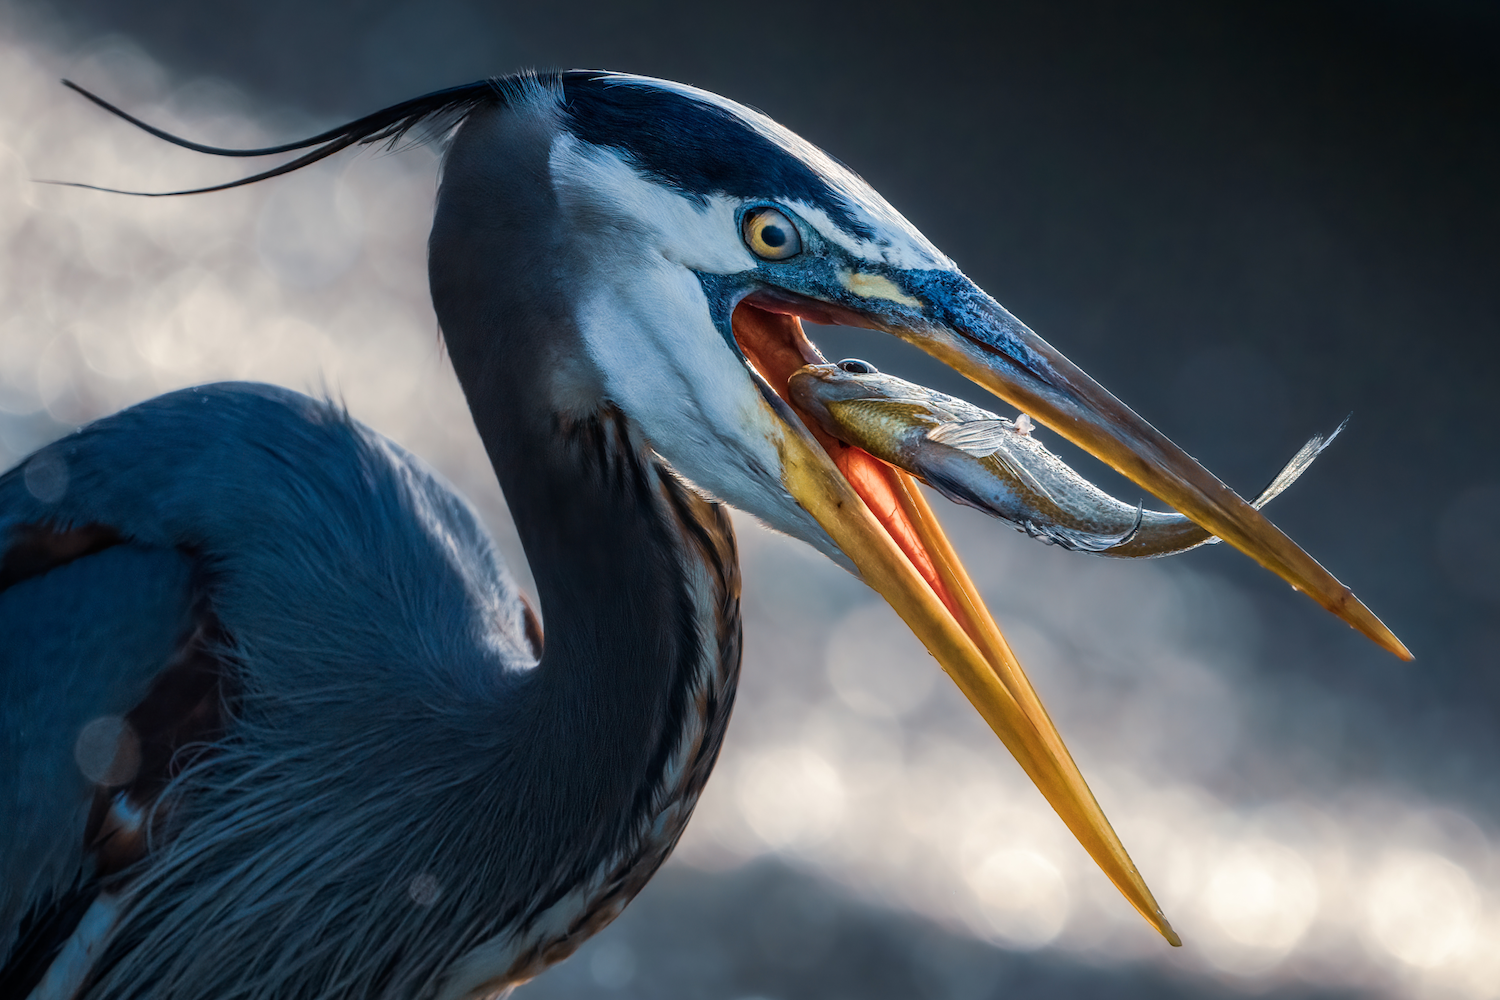 a blue bird with a yellow beak open and a fish inside its mouth